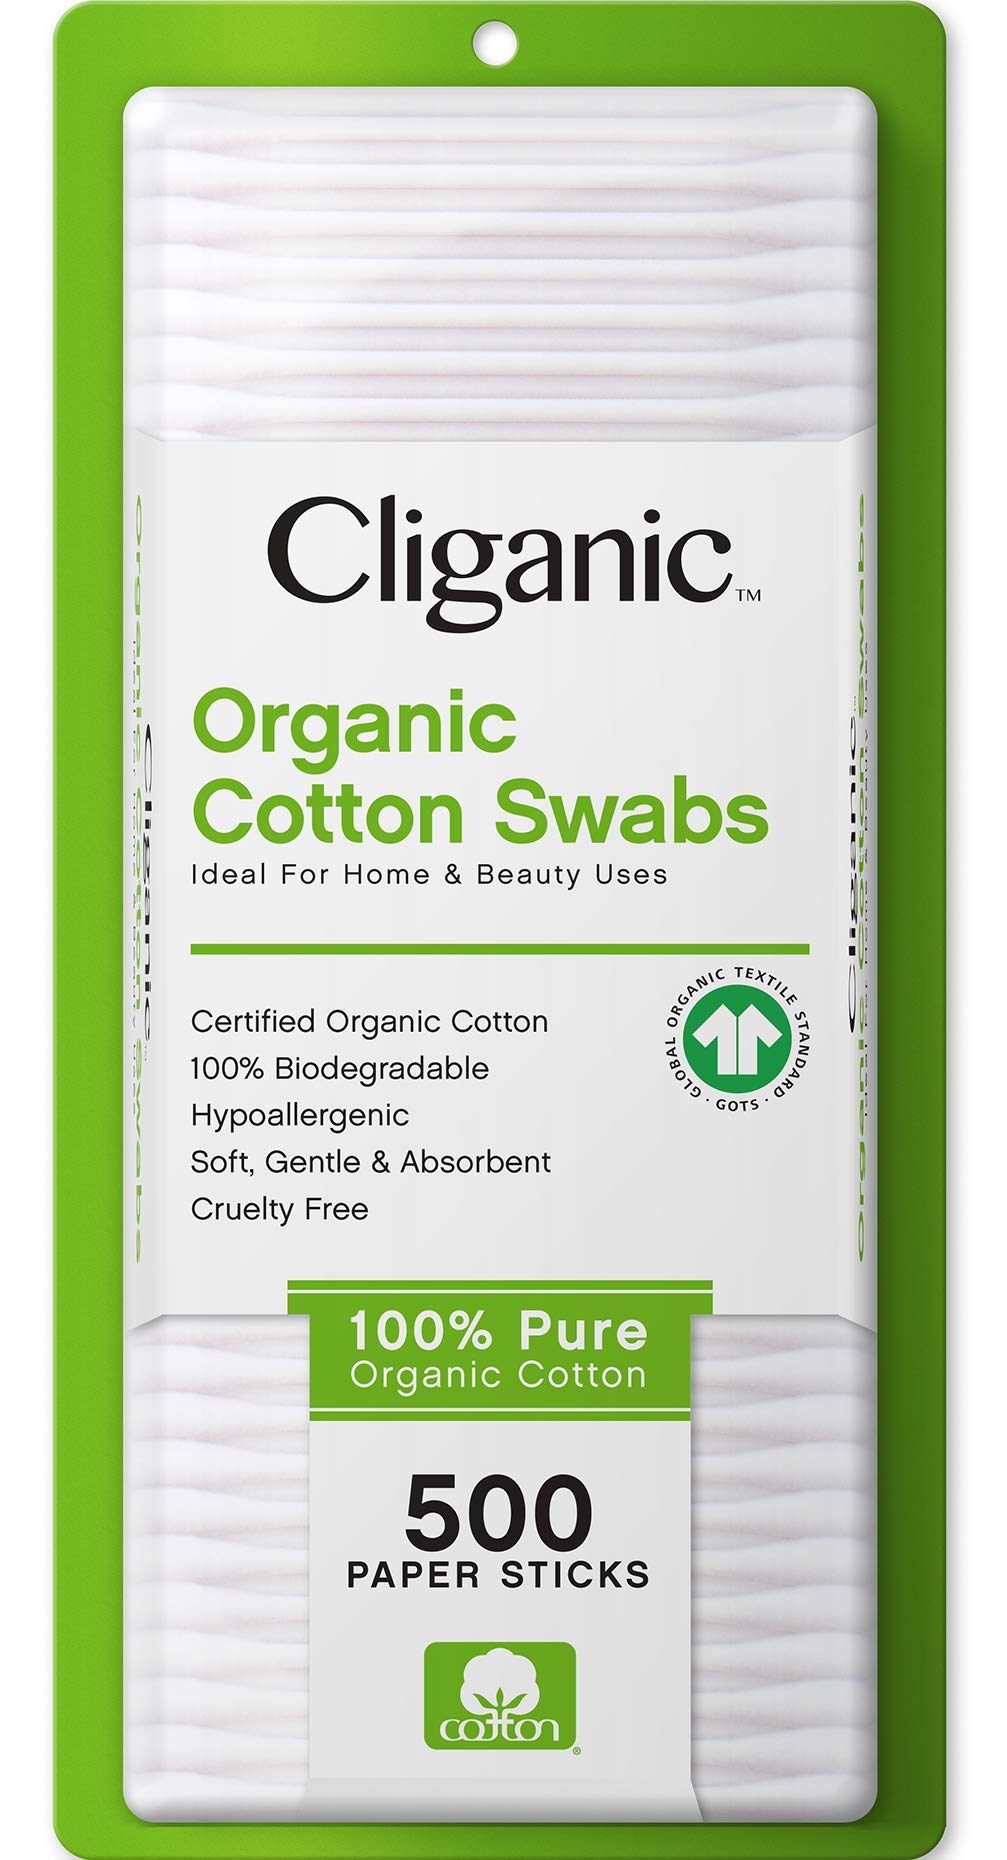 Cliganic Organic Cotton Swabs, 500 Count - 100% Pure Natural Cotton, Chlorine-Free Hypoallergenic, Soft, Gentle & Absorbent Buds